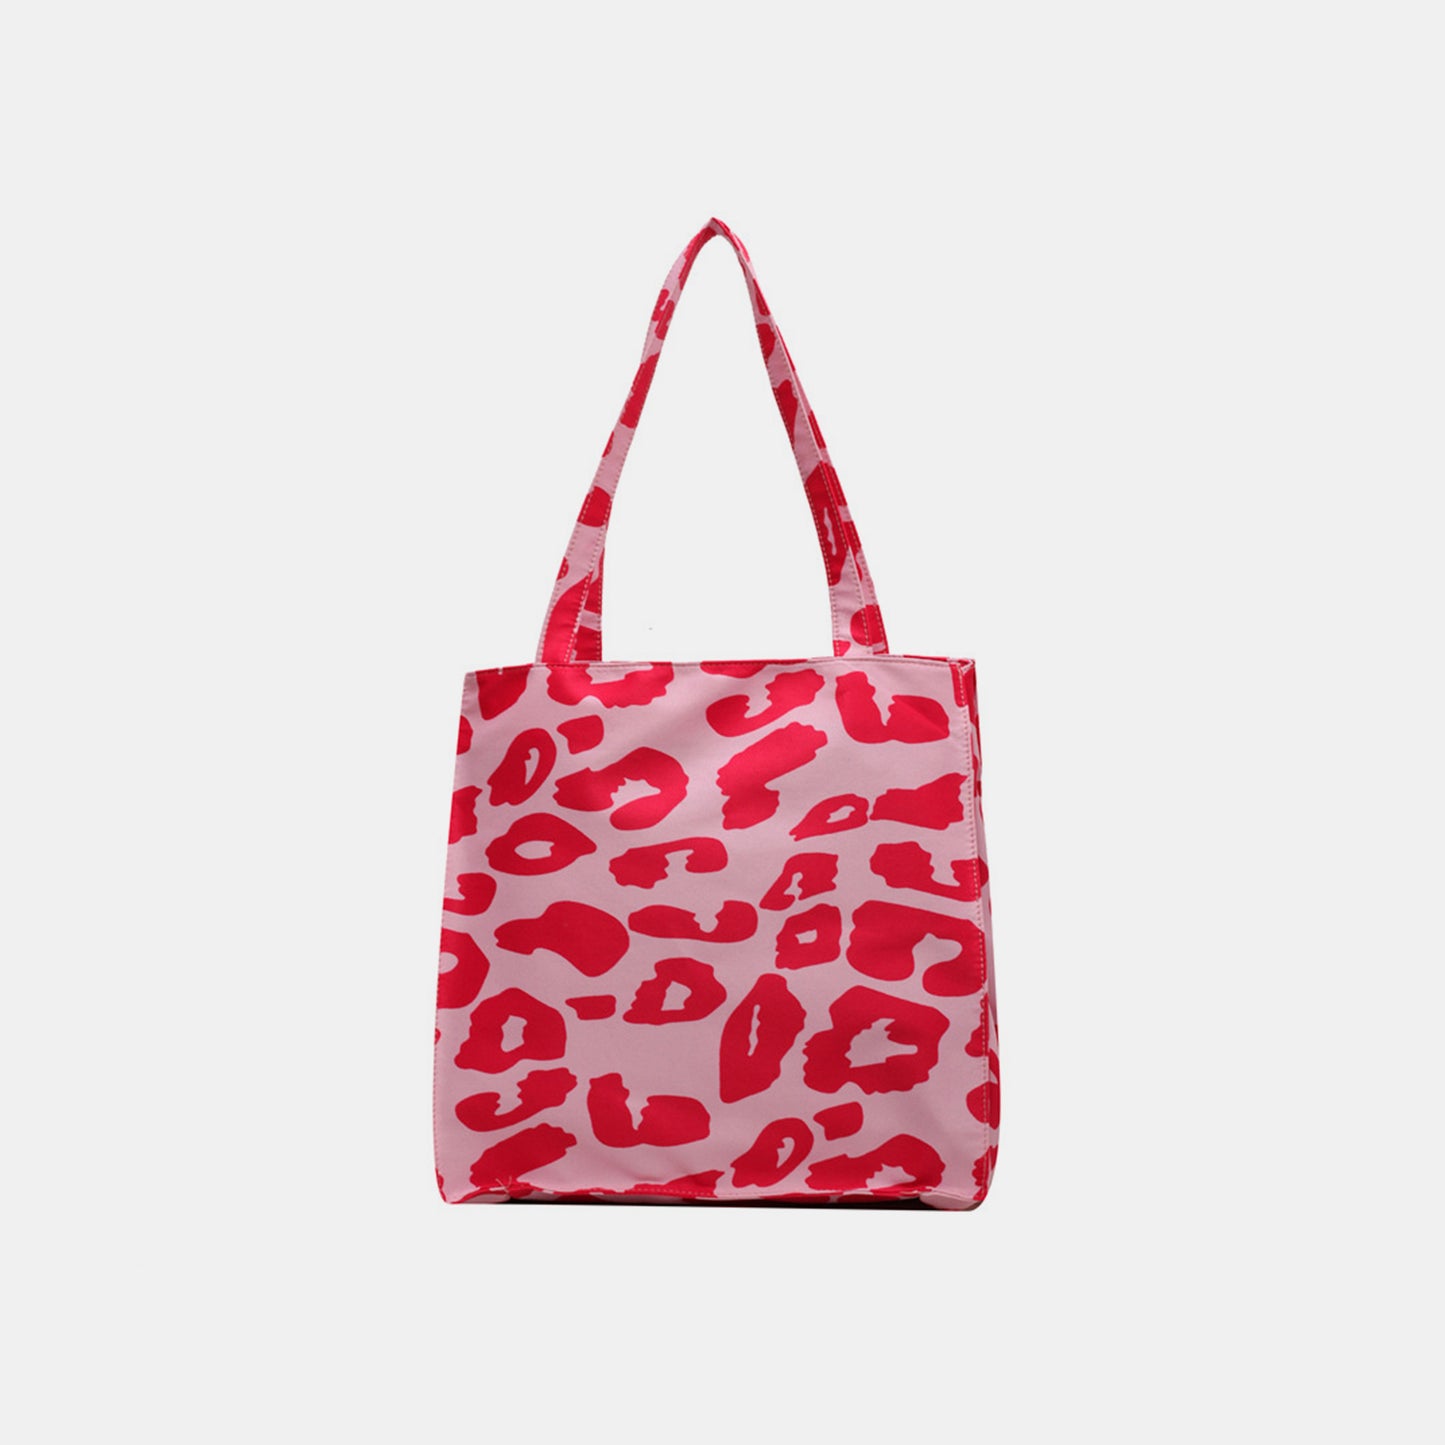 Animal Print Canvas Tote Bag Hot Pink One Size